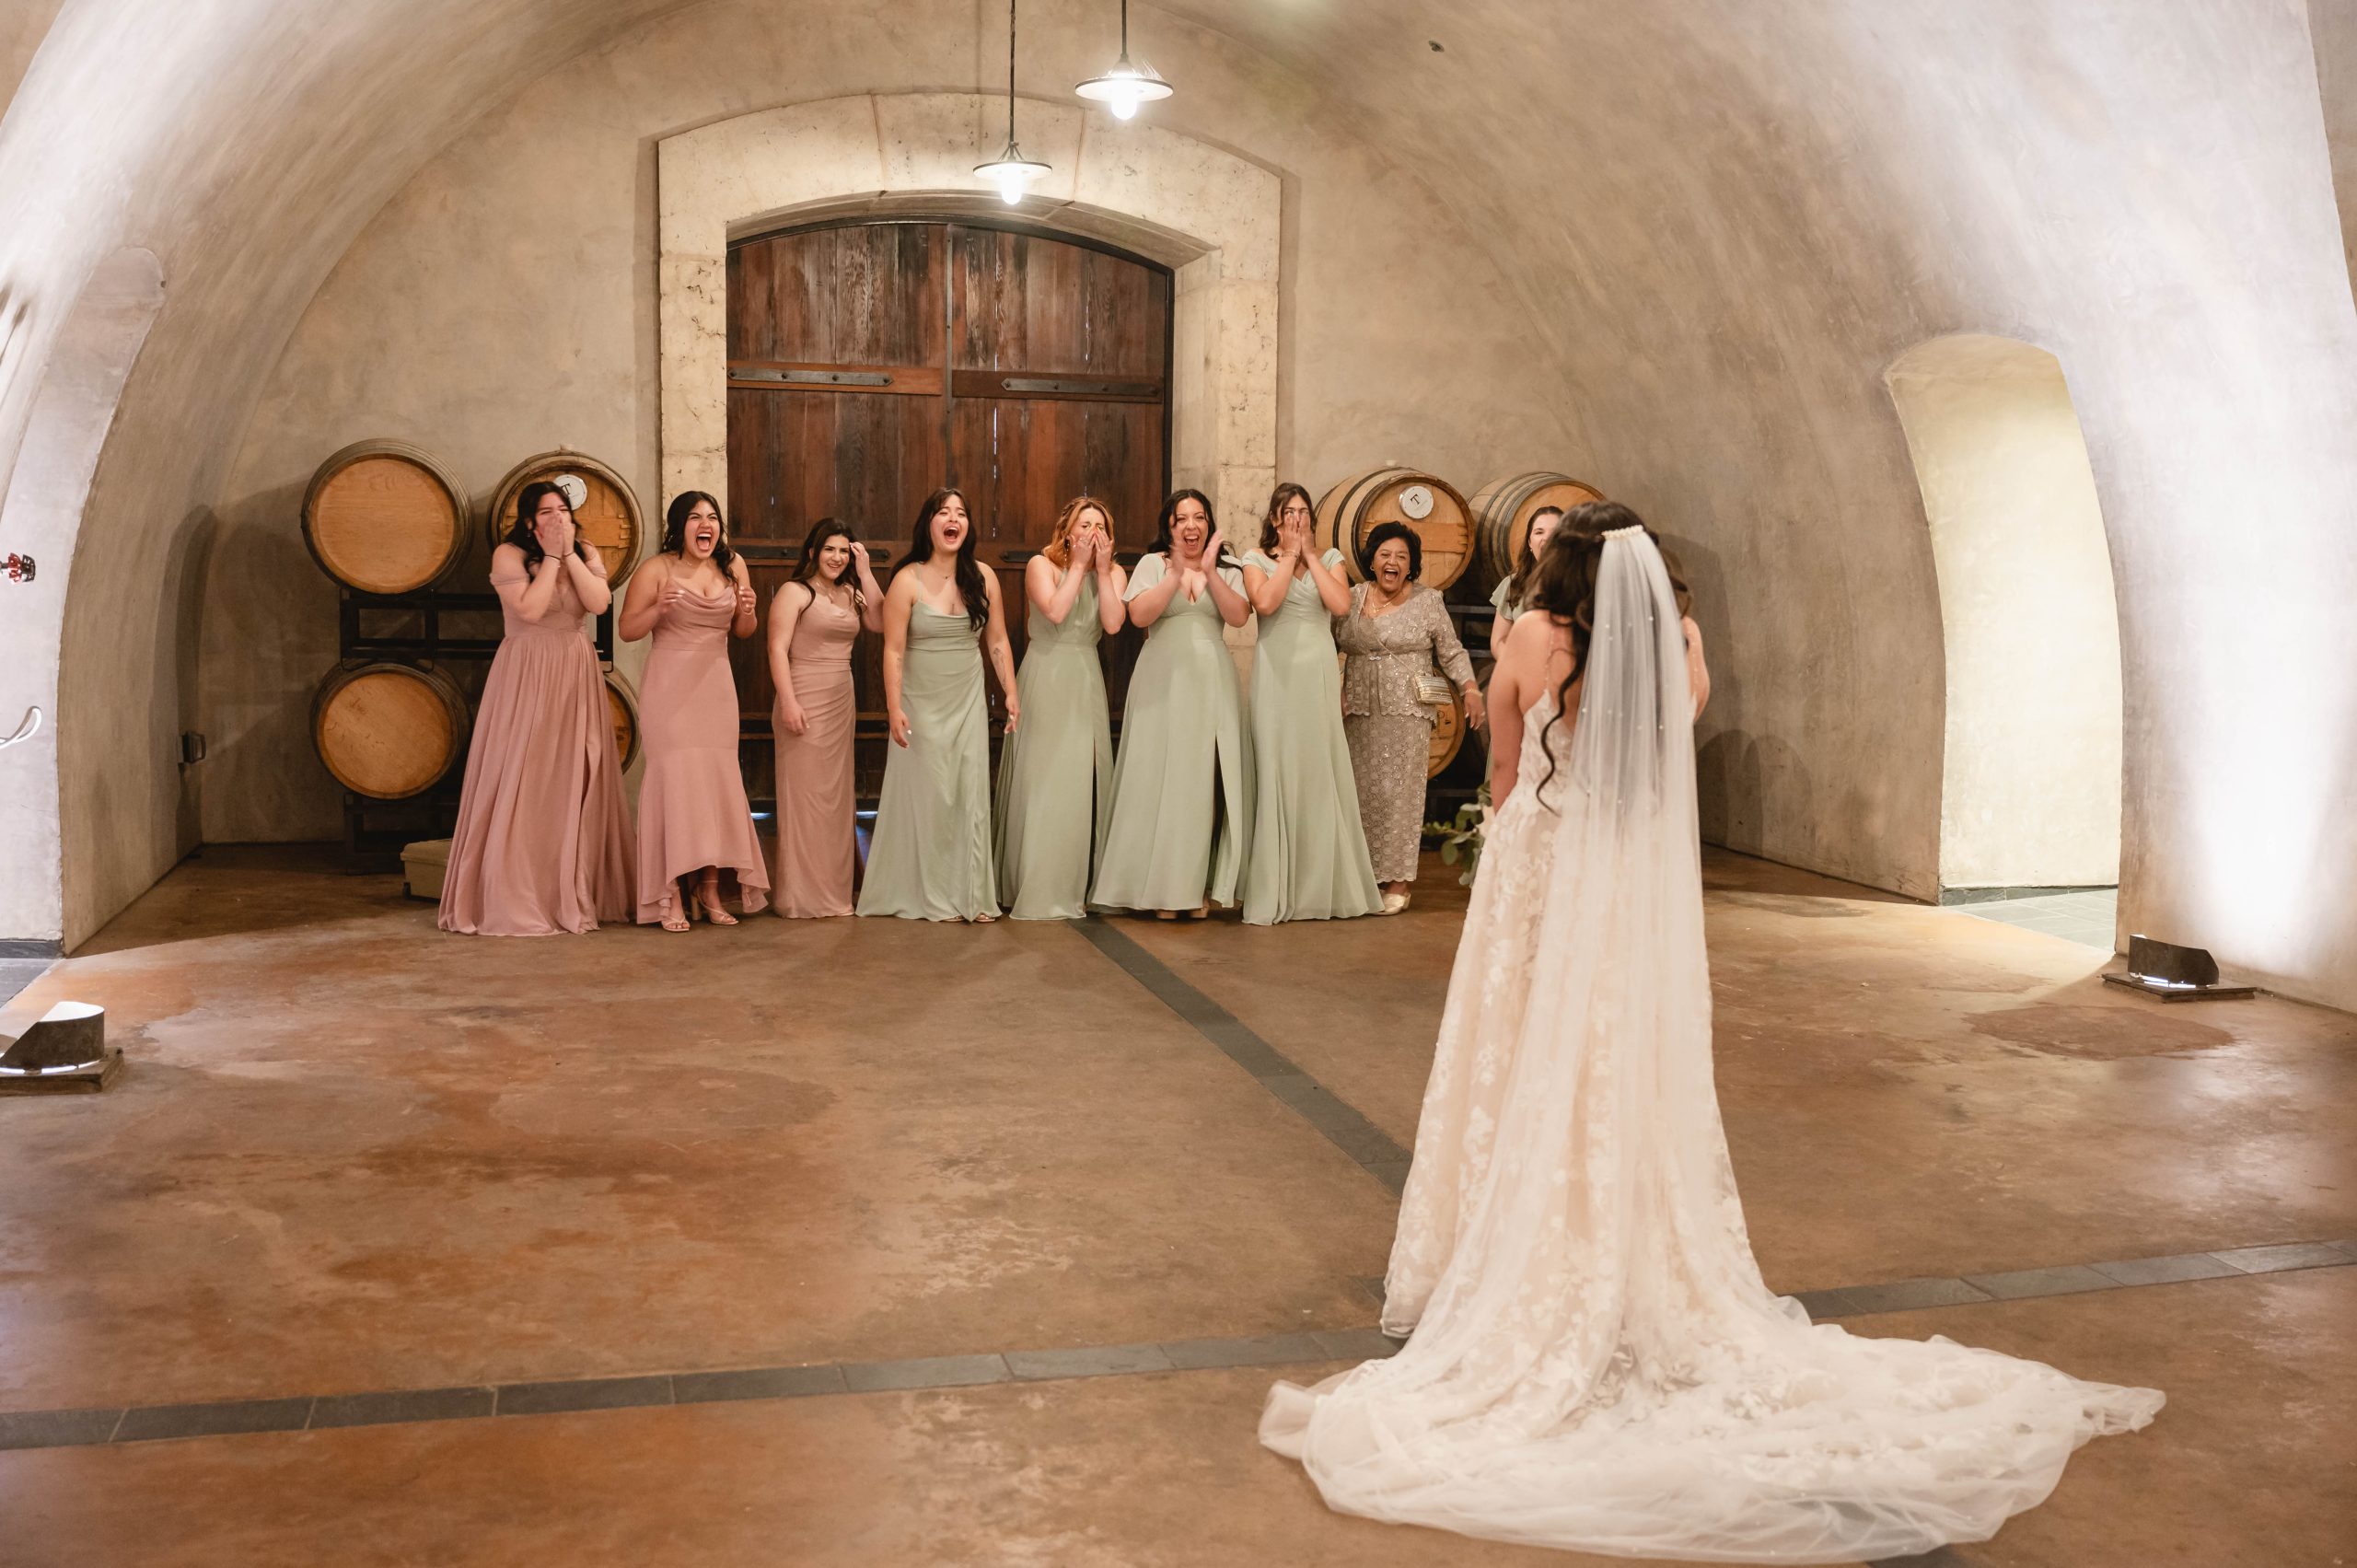 Bridesmaids and Maid of Honor (MOH) awaiting the bride revealing her wedding dress at Viansa Winery in Sonoma in the cellars